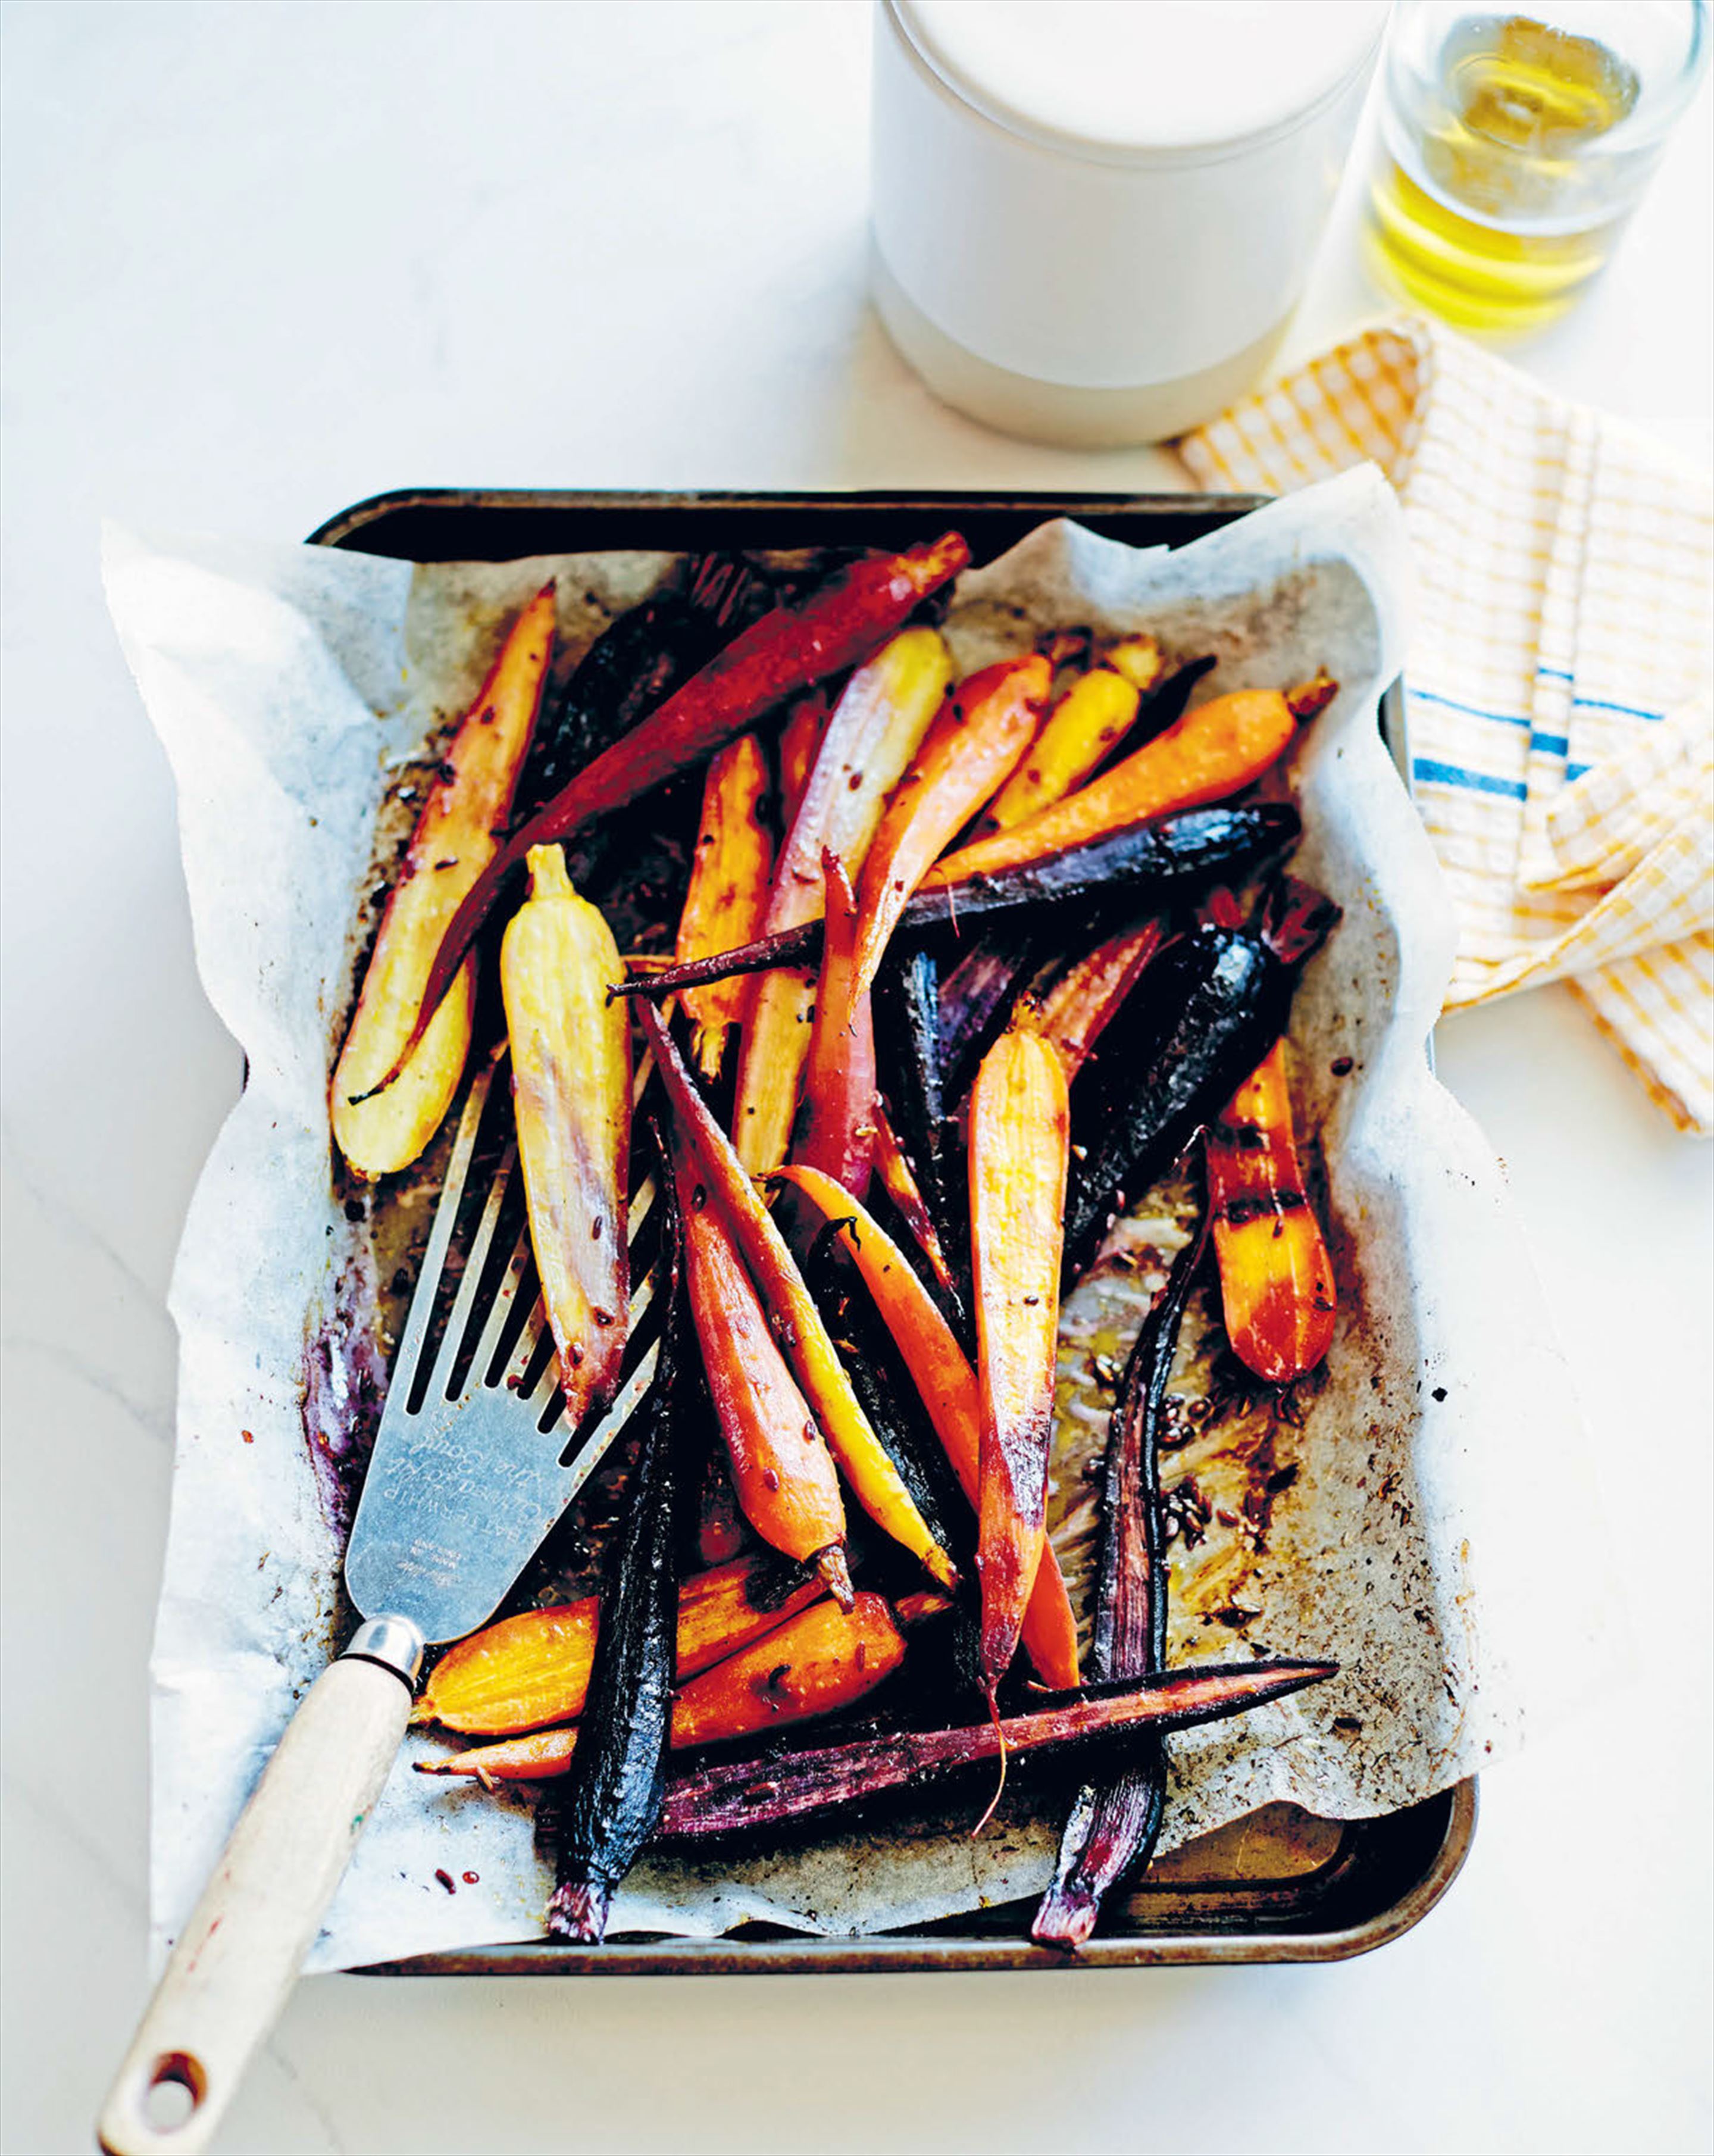 Heirloom carrots with fennel and orange dressing